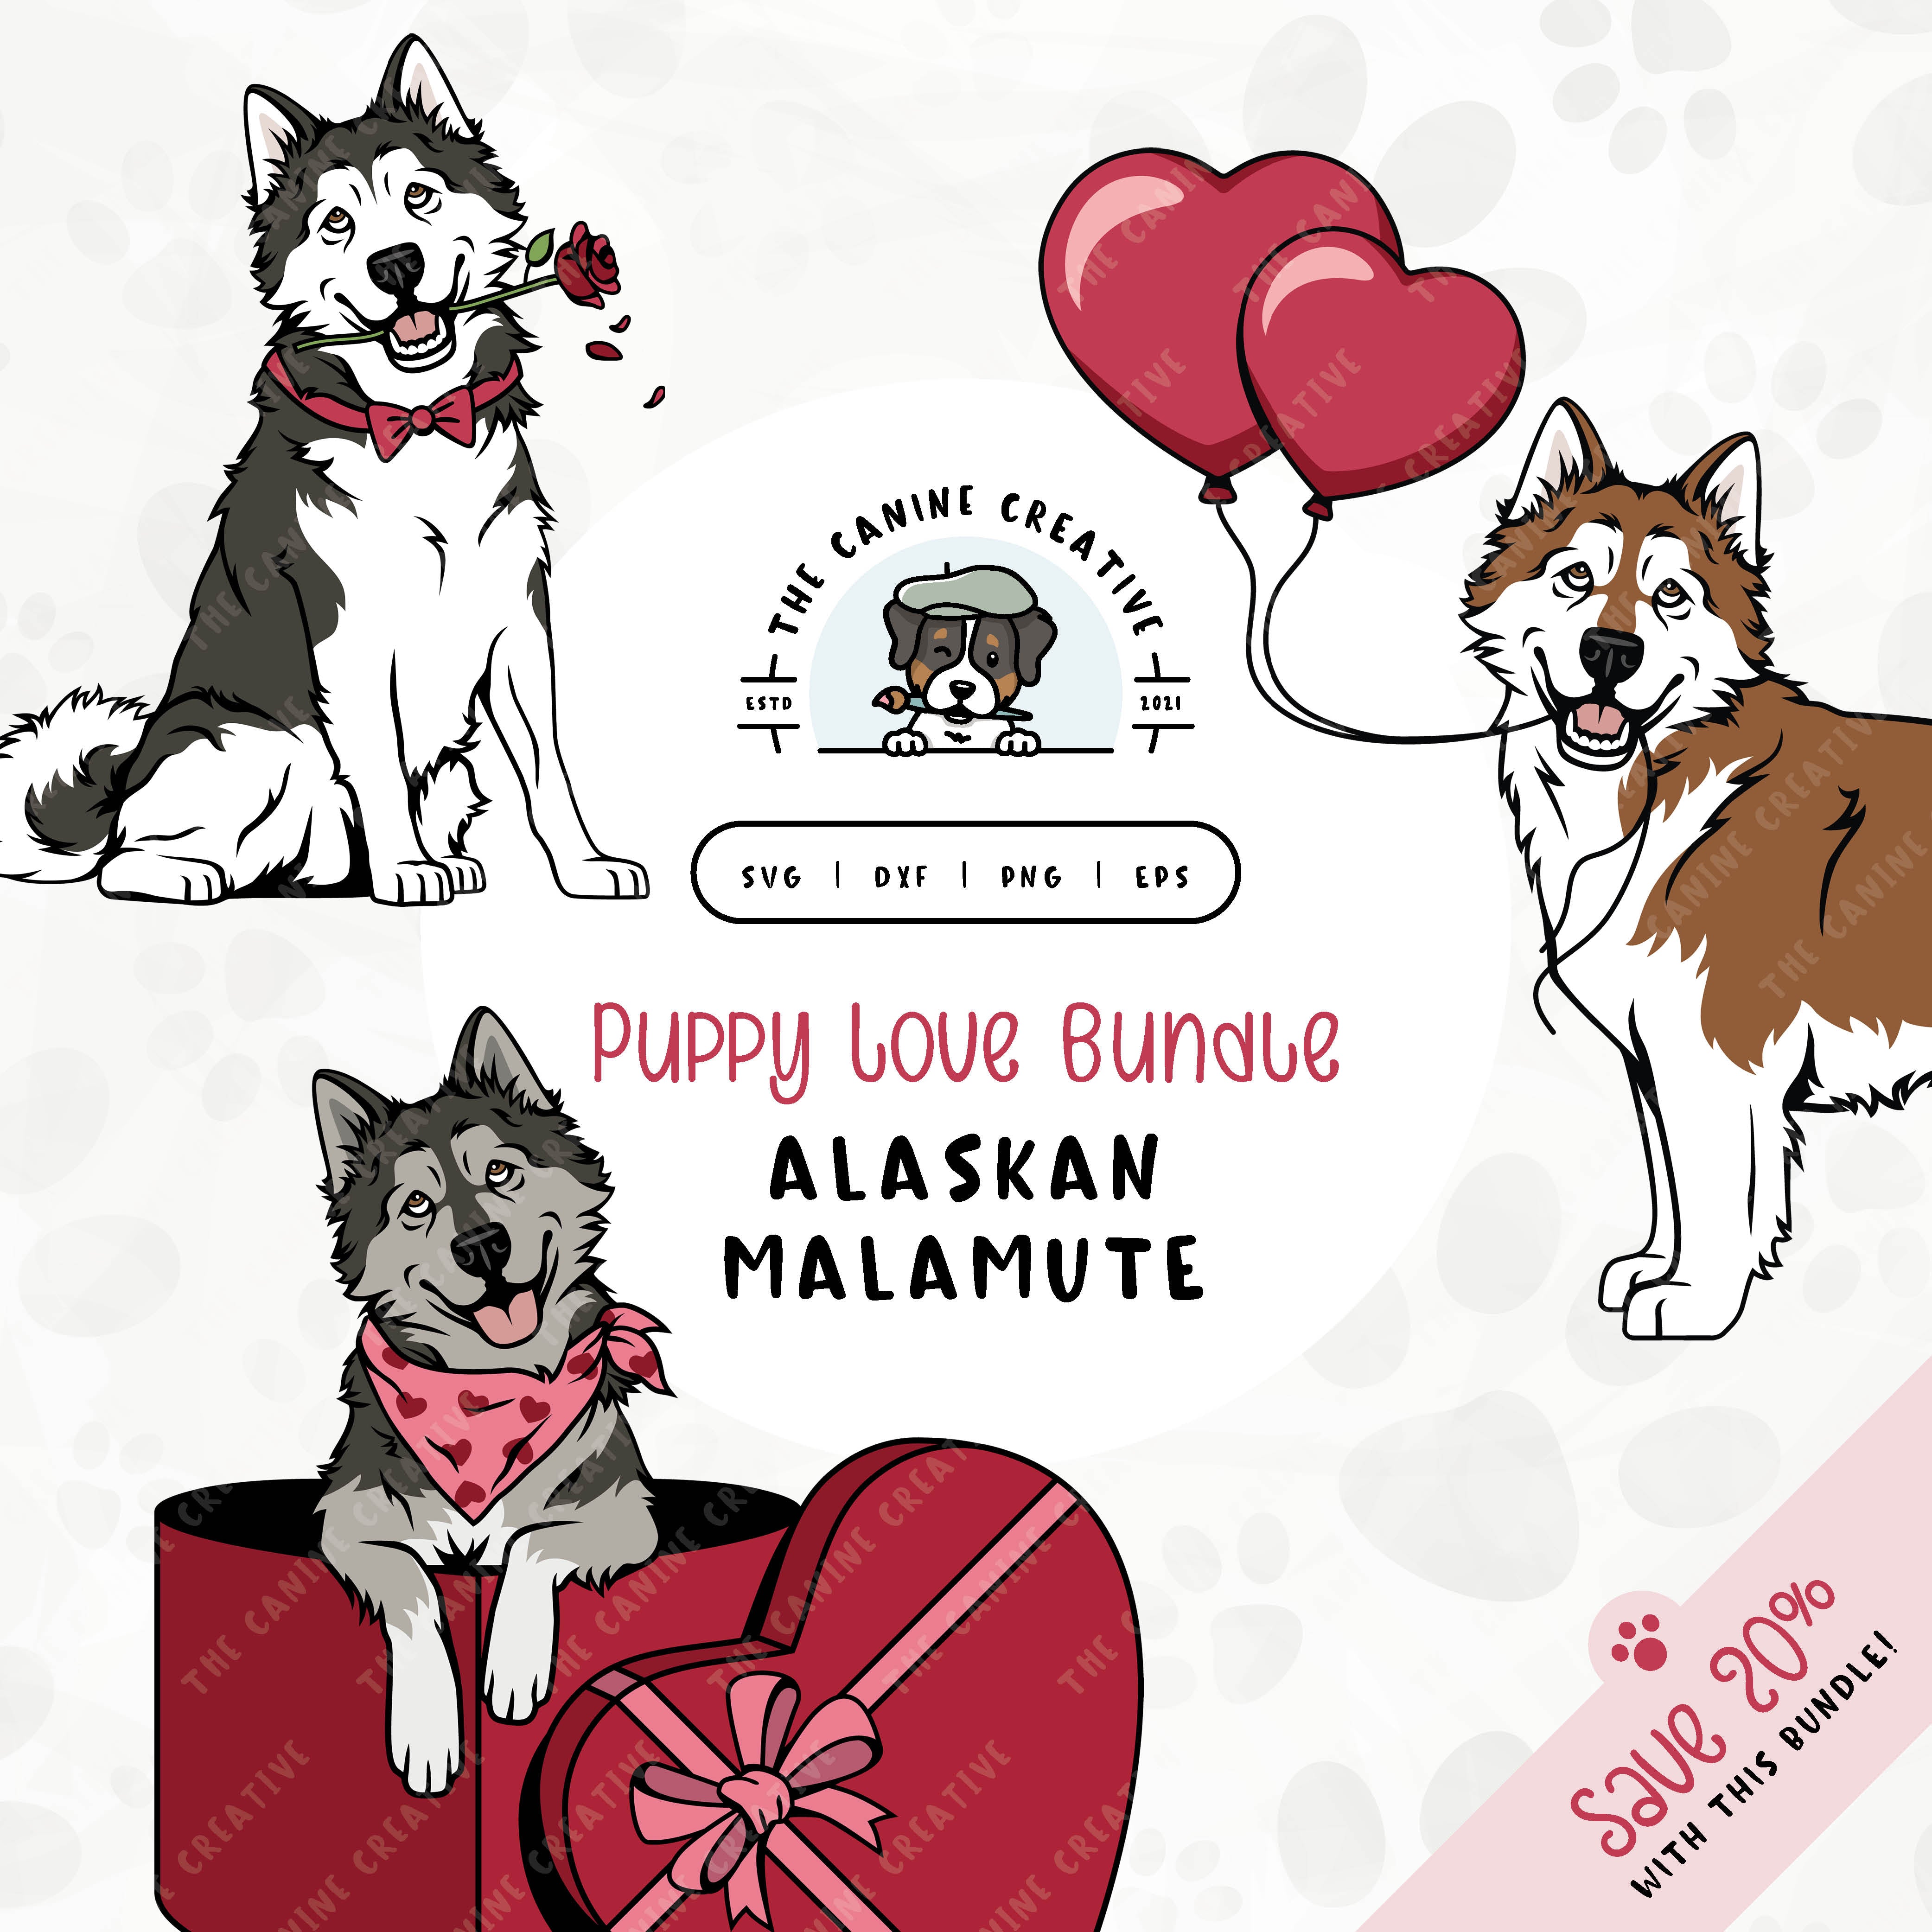 This 3-pack puppy love illustration bundle features Alaskan Malamutes holding heart balloons, peeking out of a heart-shaped box, and holding a rose. File formats include: SVG, DXF, PNG, and EPS.